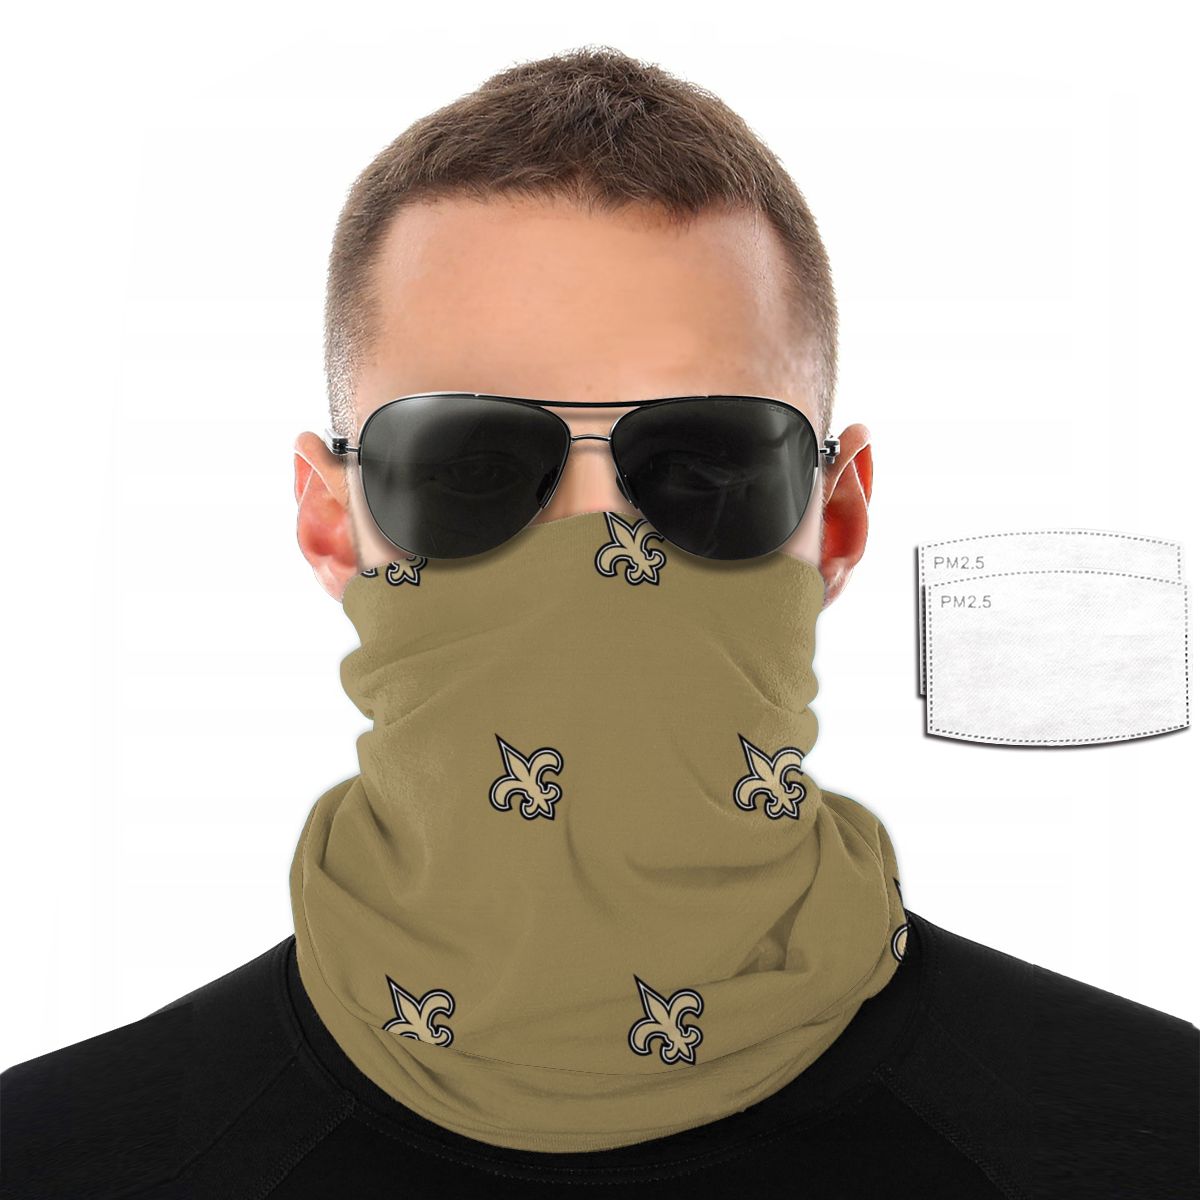 Reusble Mouth Cover Bandanas New Orleans Saints Variety Head Scarf Face Mask With PM 2.5 Filter